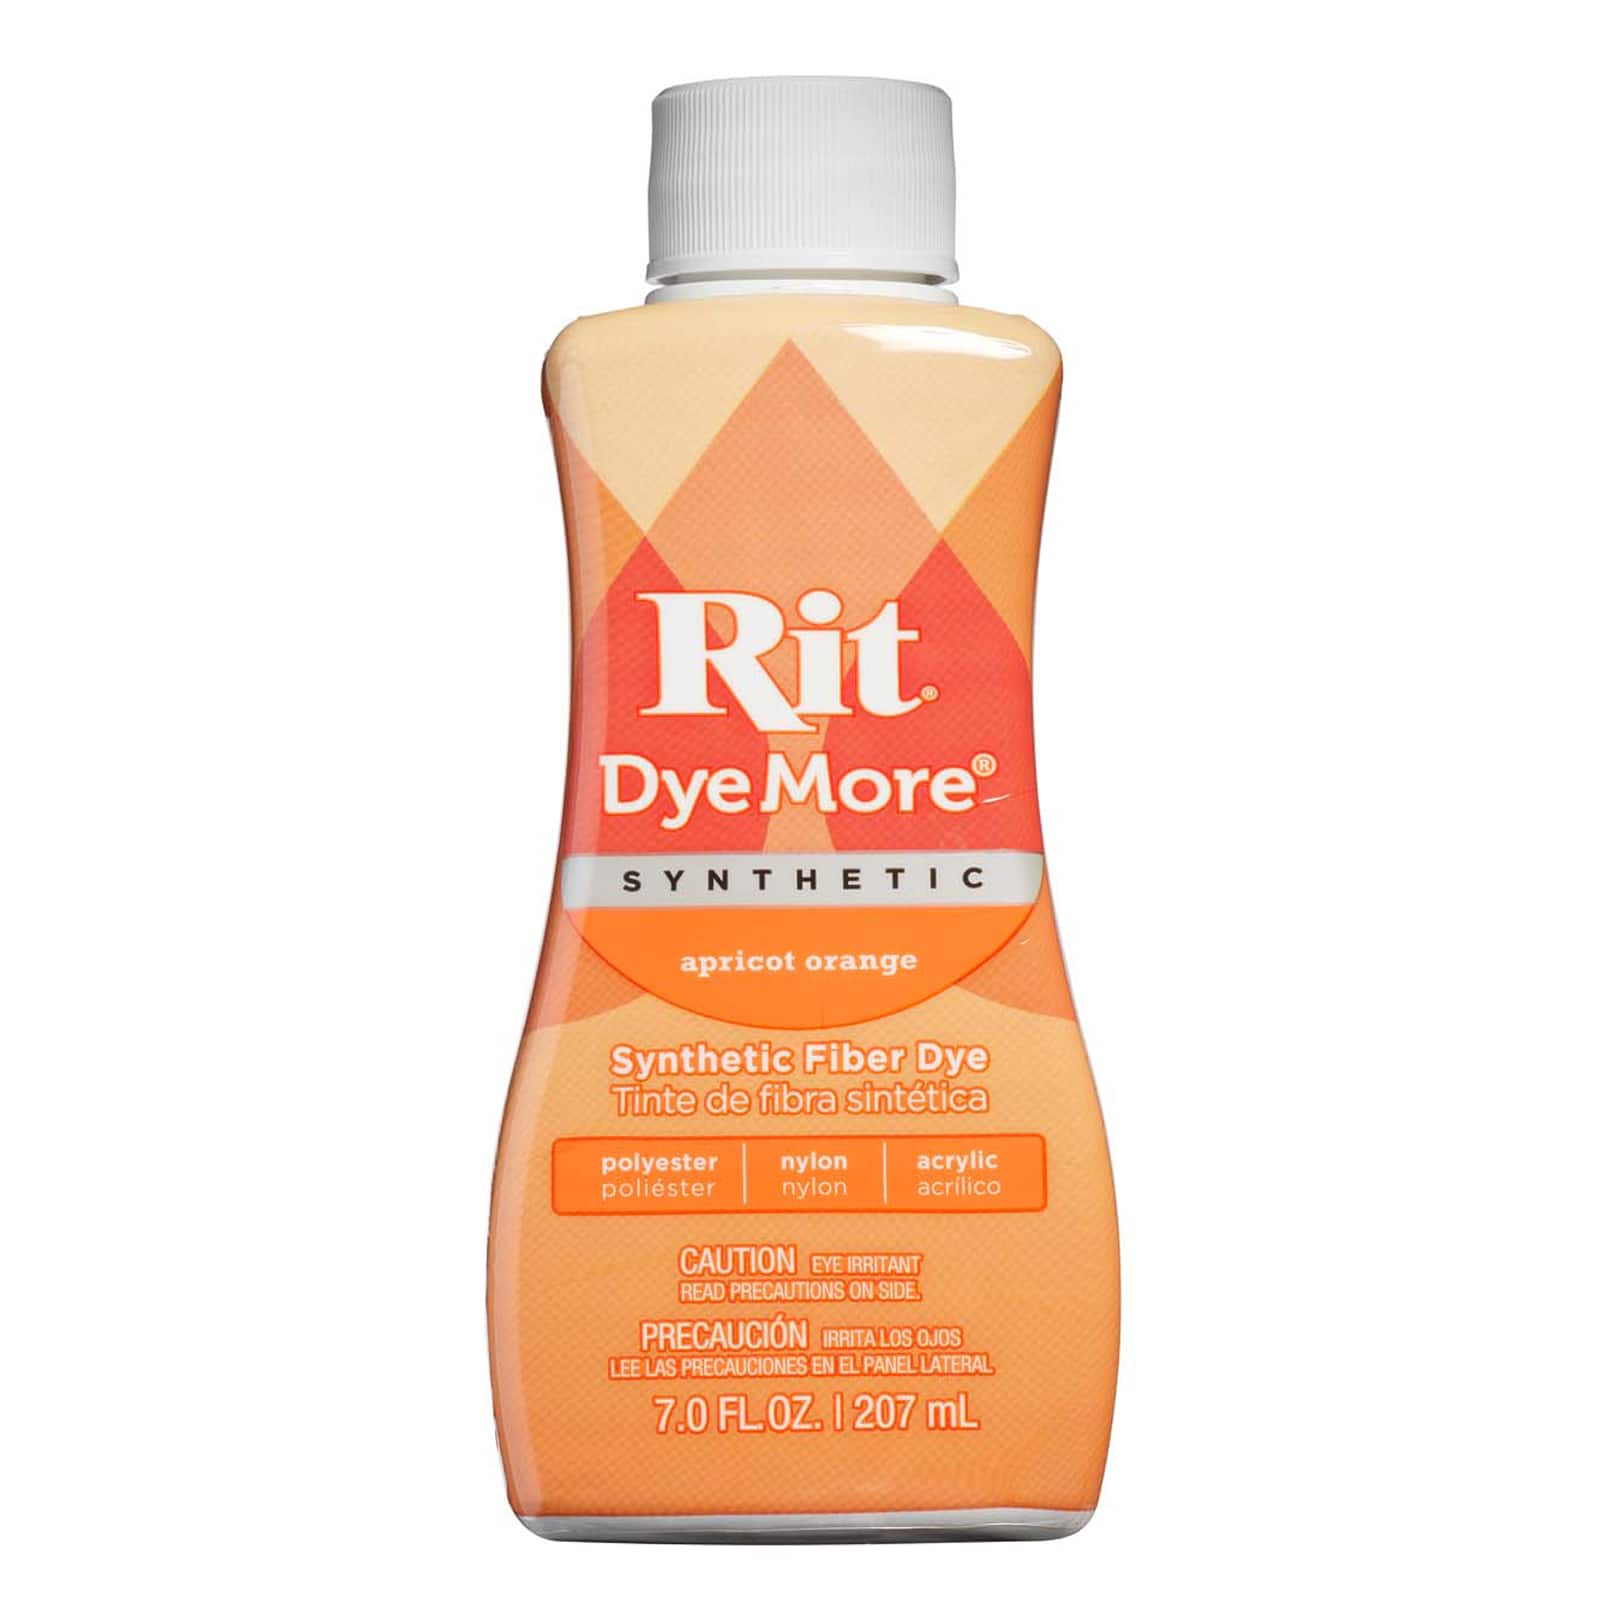 Rit now dyes polyester!! Announcing Rit Dyemore, Rit's new